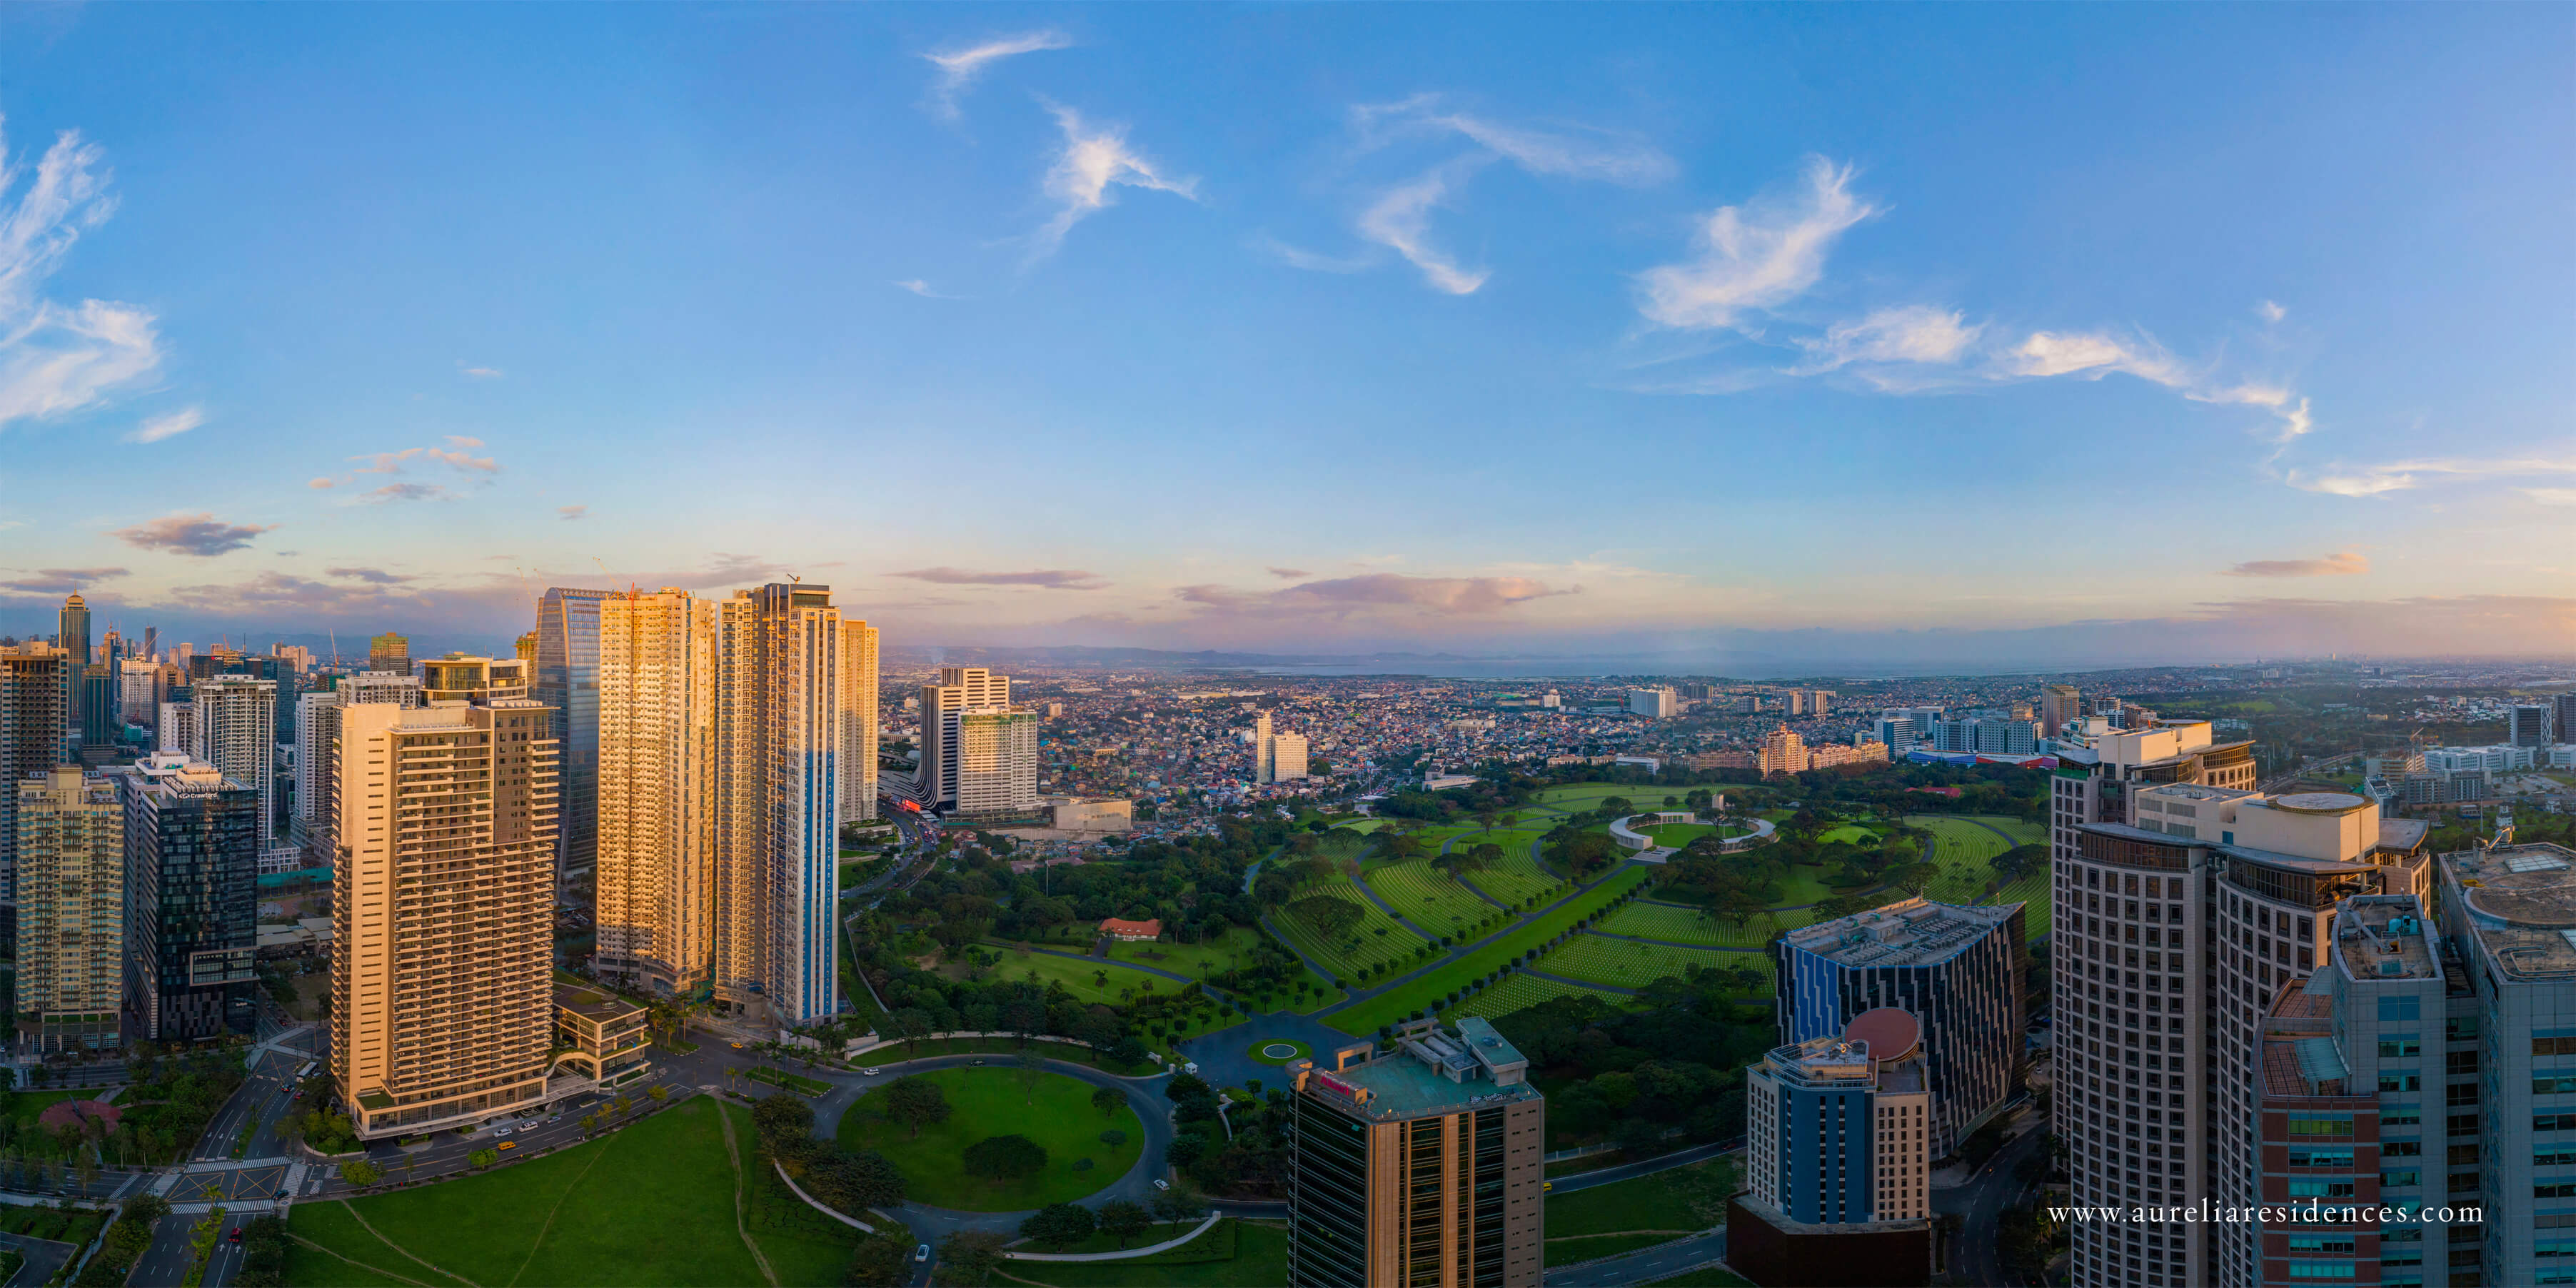 East unit residences can get a priceless, uninterrupted view of the city at this condominium. Photo source: Aurelia Residences website